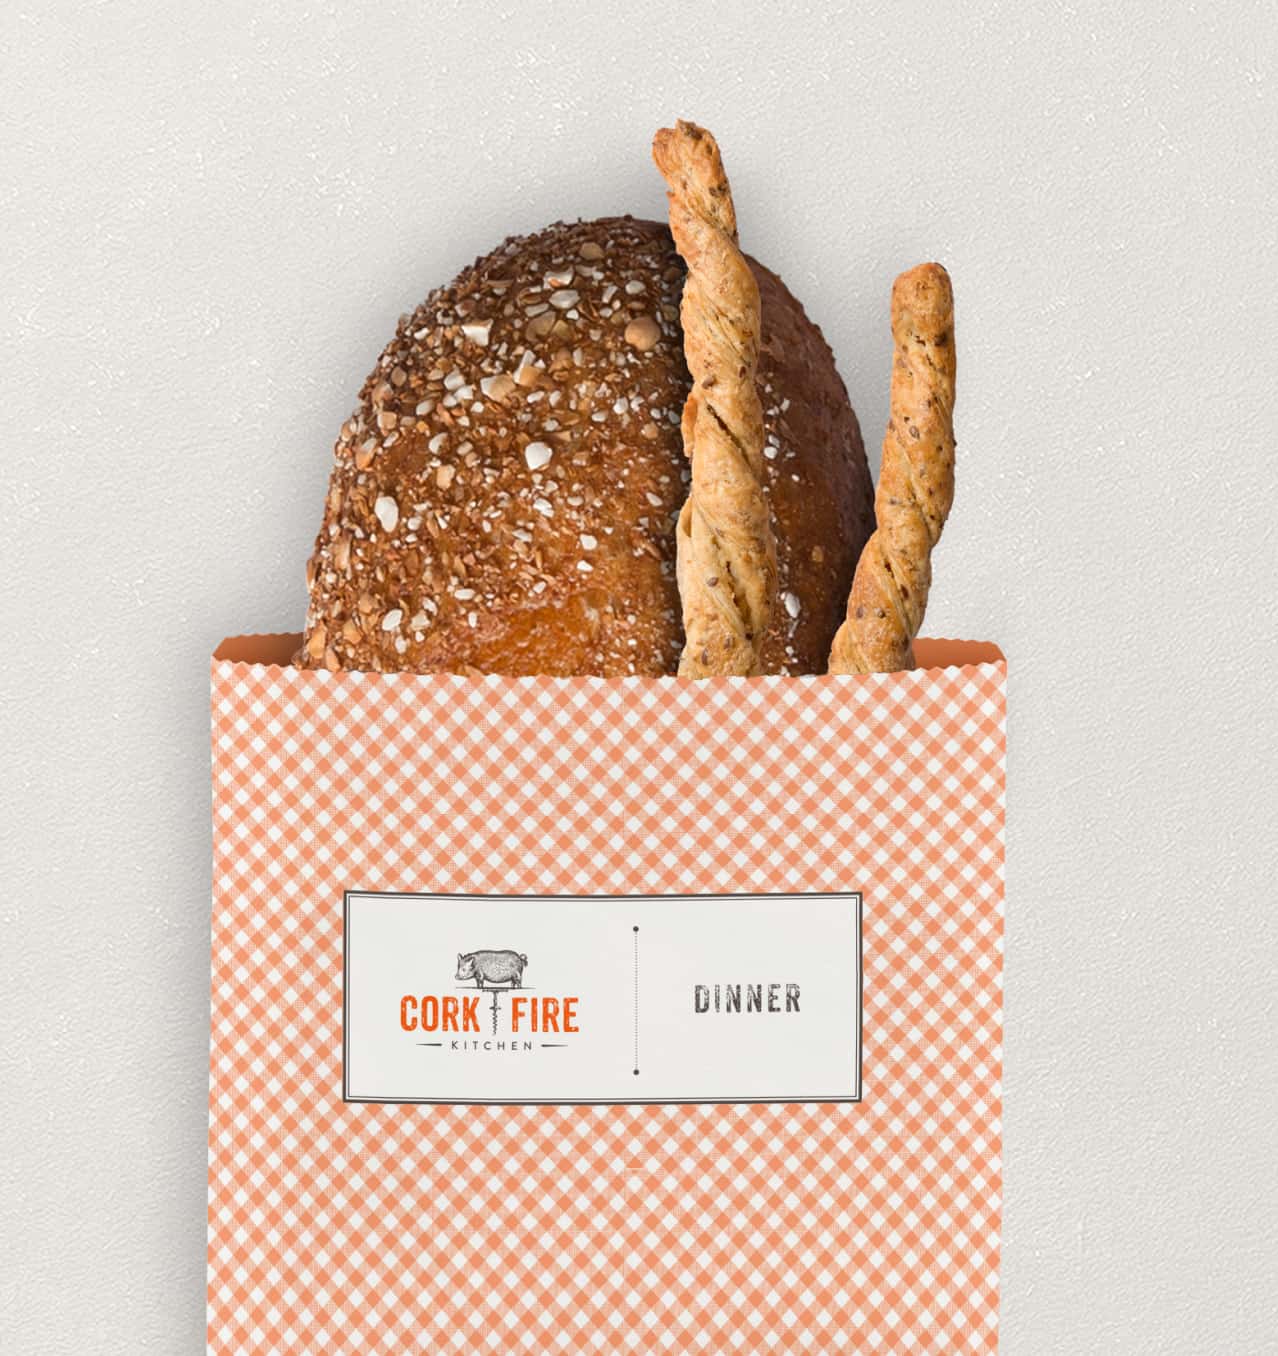 A paper bag with a checkered orange pattern hanging on the wall containing a round loaf of bread and two breadsticks, bearing the 'CORK & FIRE' logo.